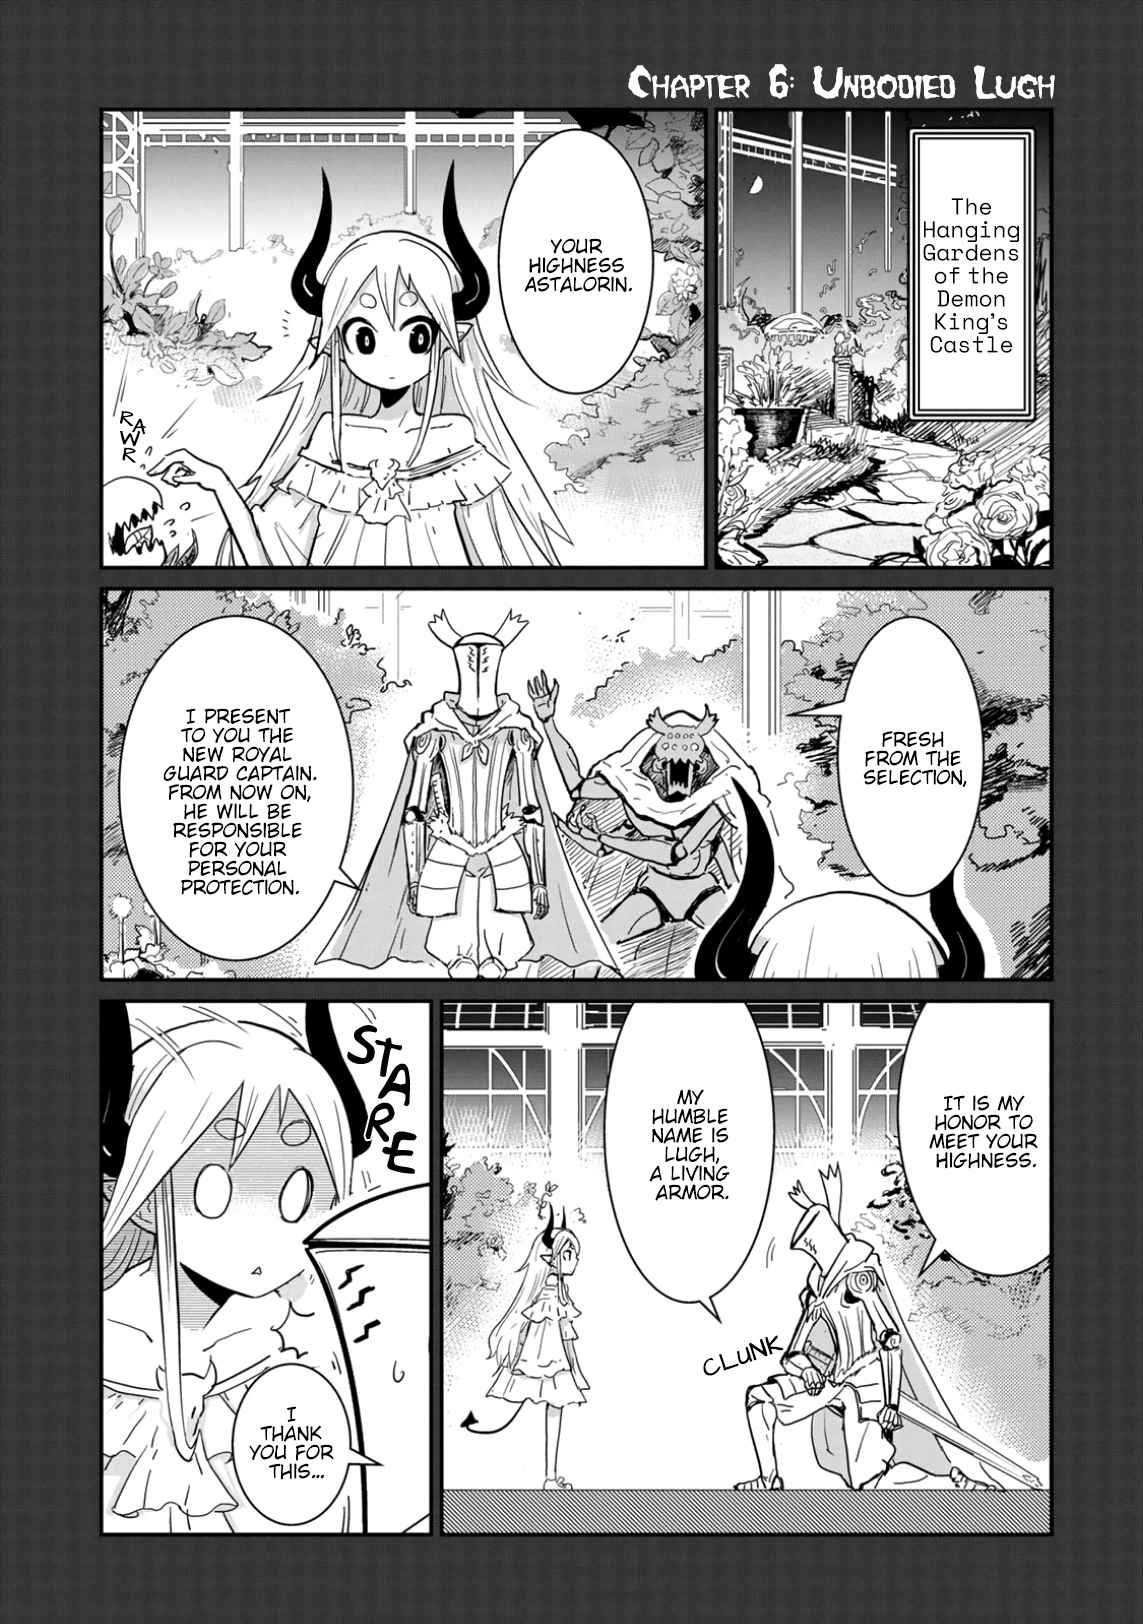 Don't Cry Maou chan Vol. 1 Ch. 6 Unbodied Lugh